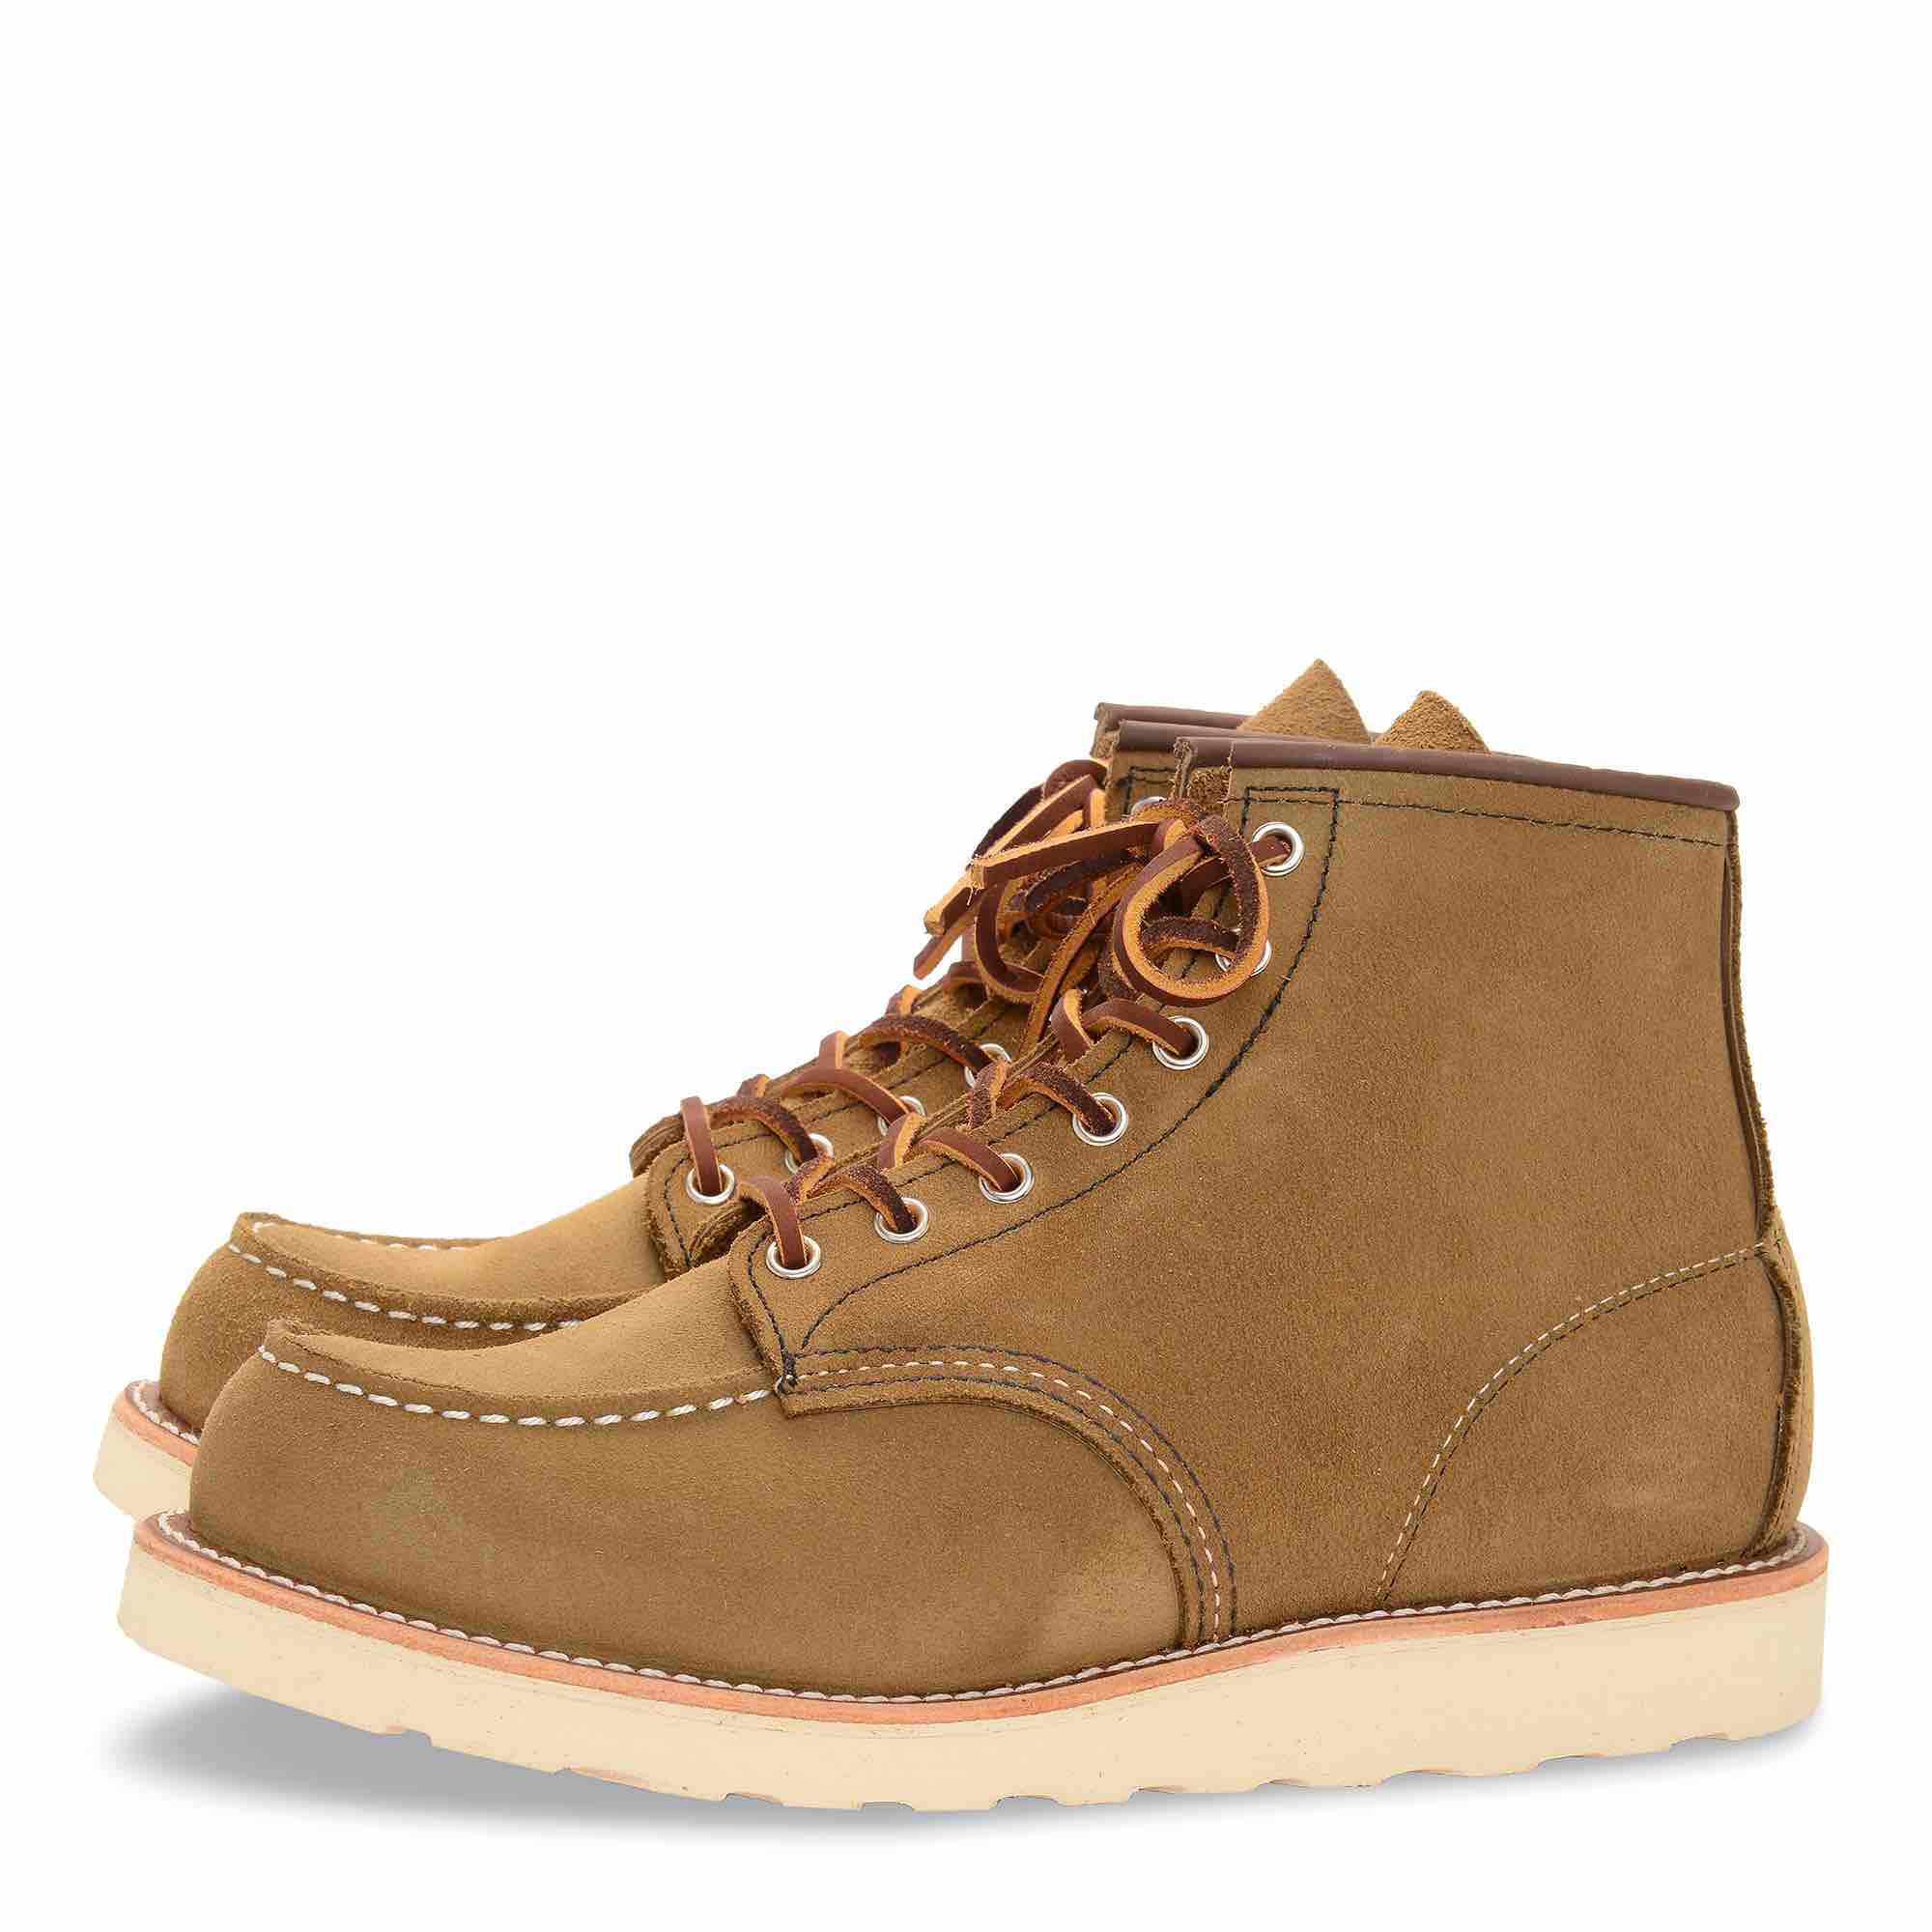 Red Wing - 8881 - Classic Moc Toe (Olive Mohave) - Brund